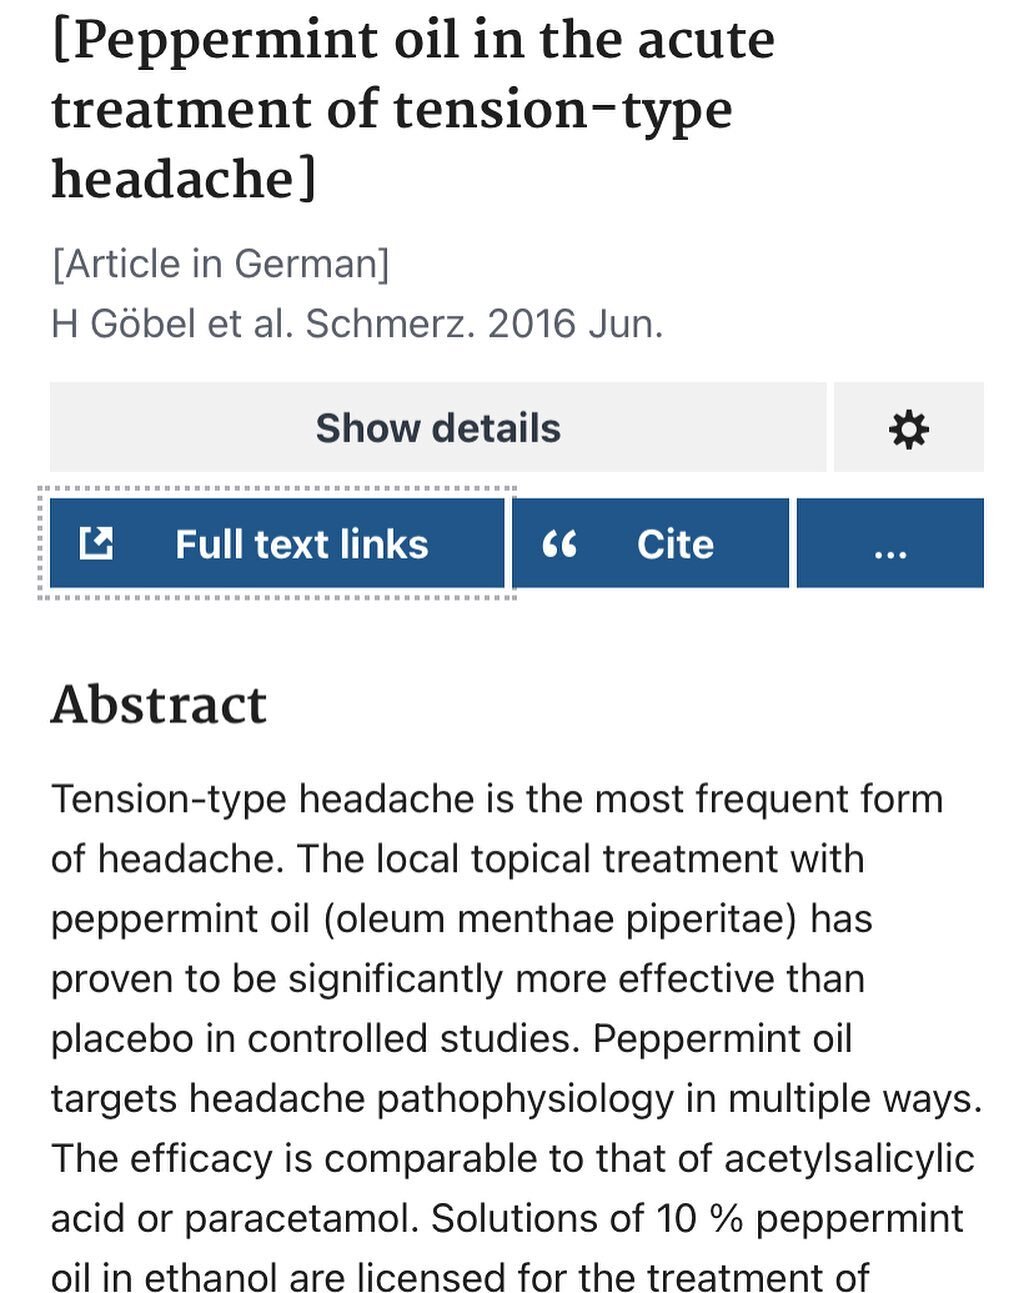 Products backed by science 🧬 

Gleam &amp; Glow is proud to offer research-based skincare Canada wide 🇨🇦

Here is some information on our headache roll-on made with pure peppermint essential oil (&gt;10% active ingredient formulation) 🌱

Topicall